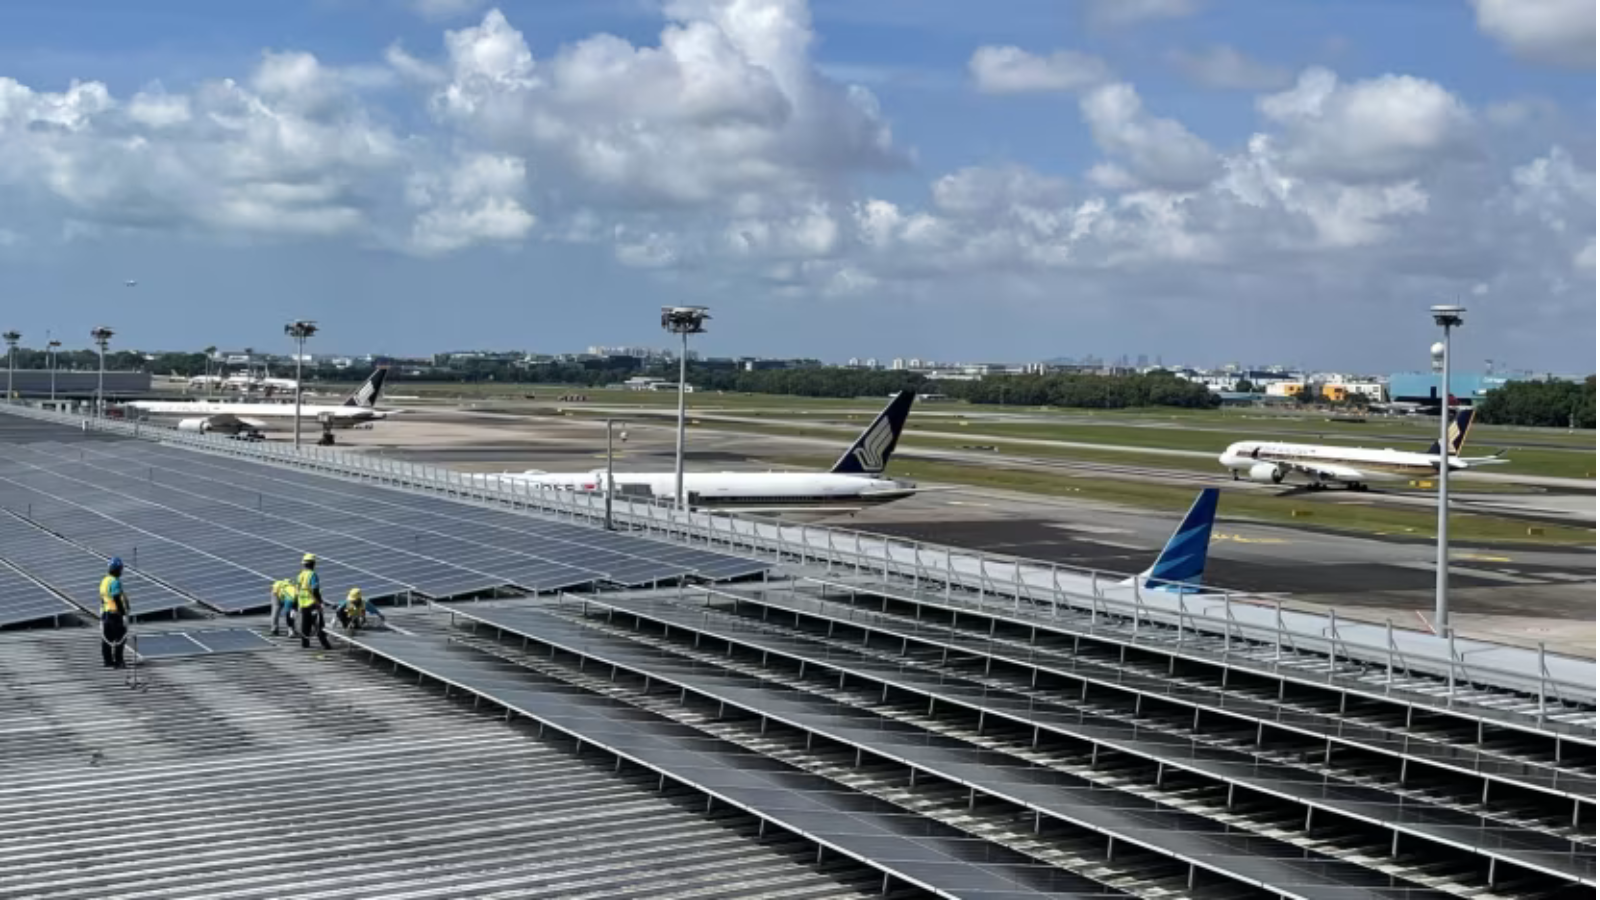 Changi Airport Solar Rooftop